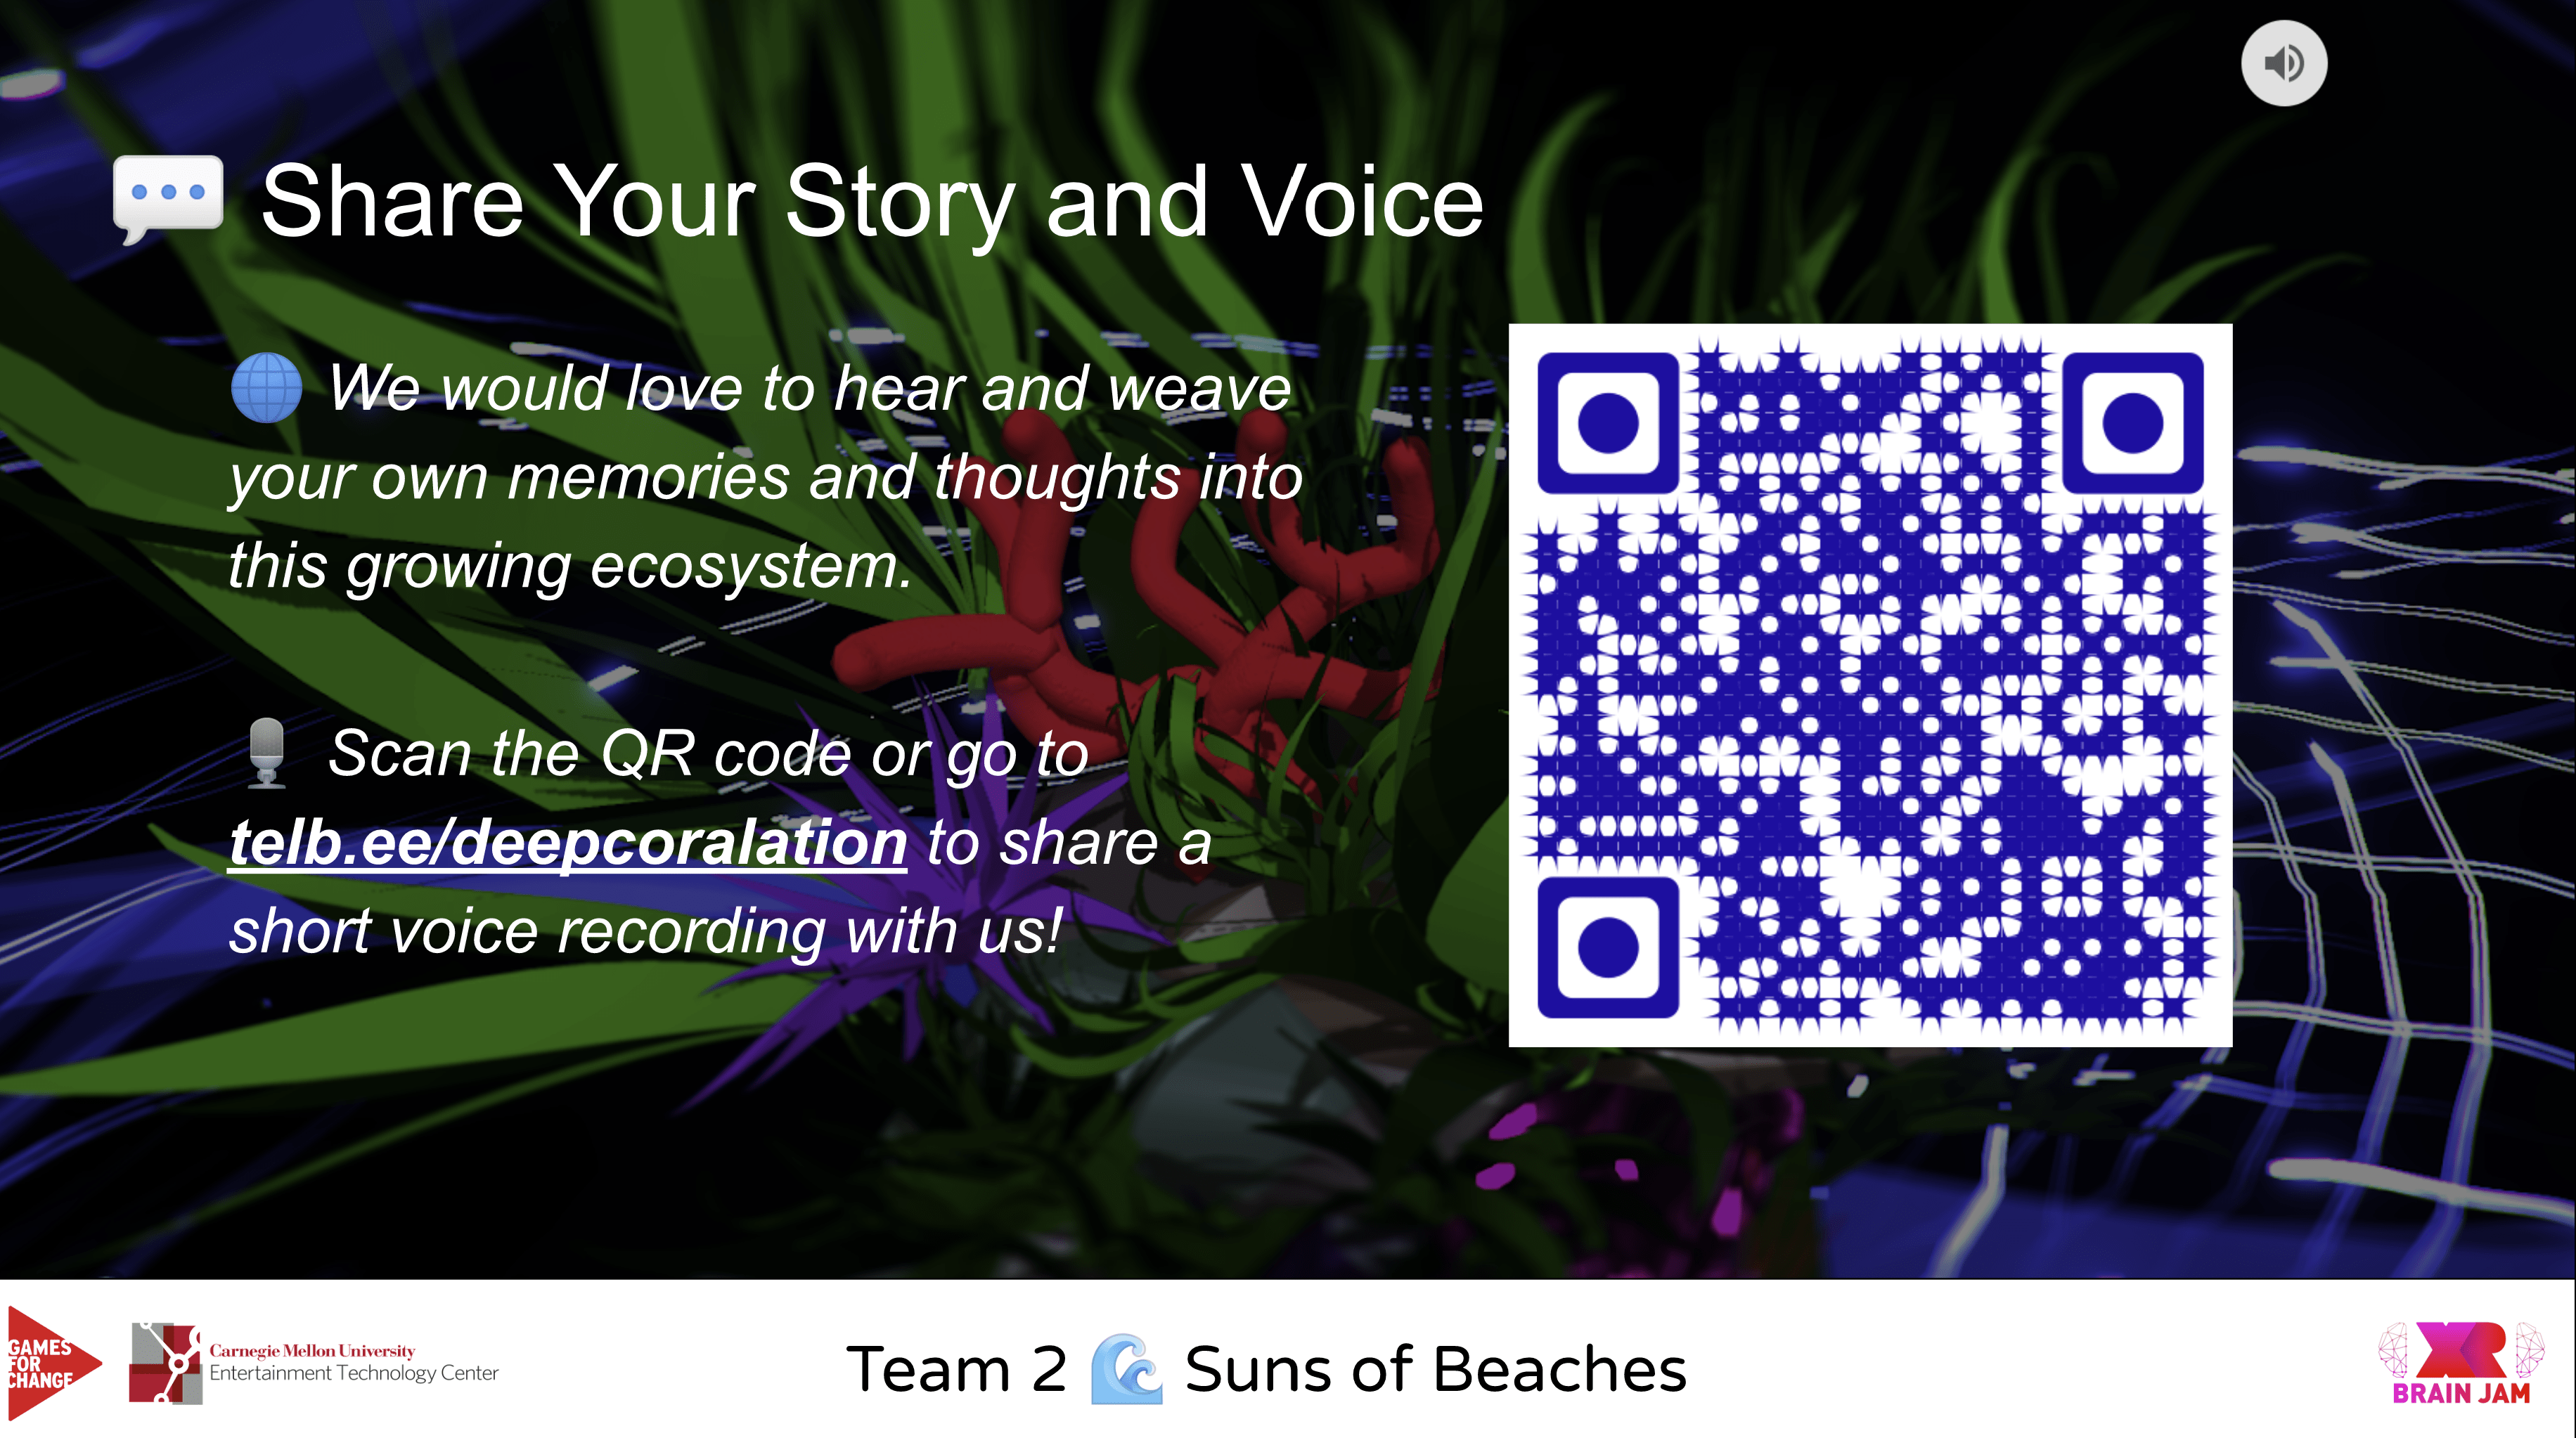 Deep Coralation: share your story and voice